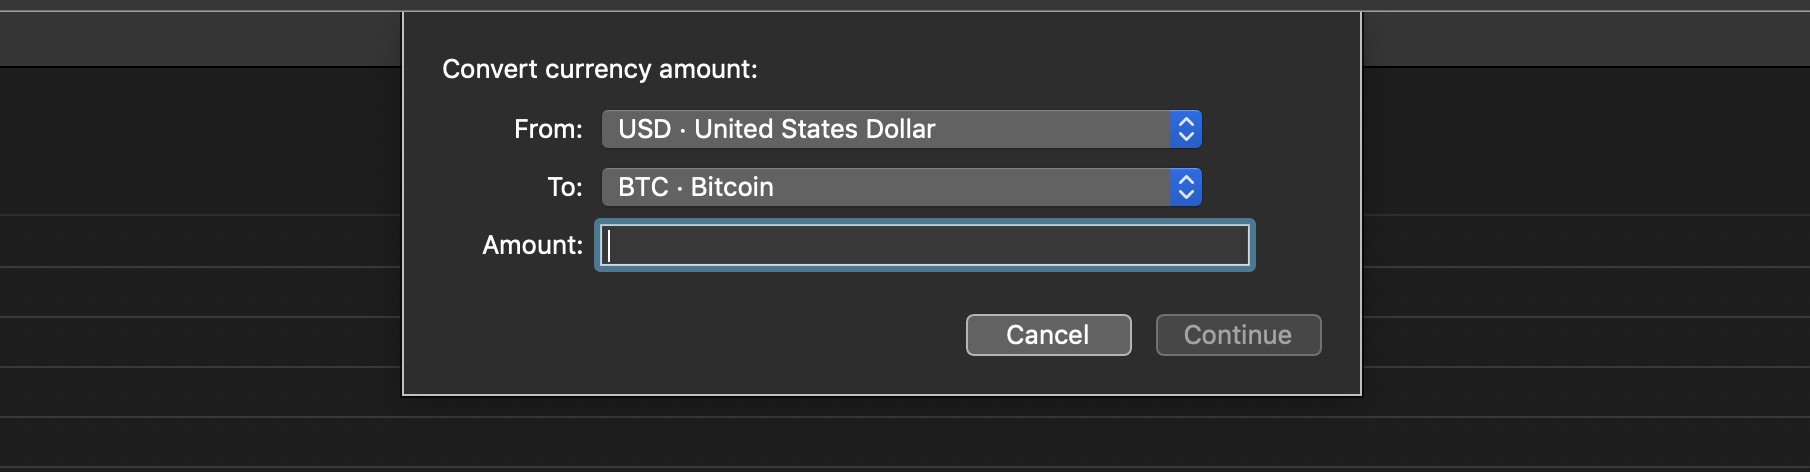 Currency Conversion Interface